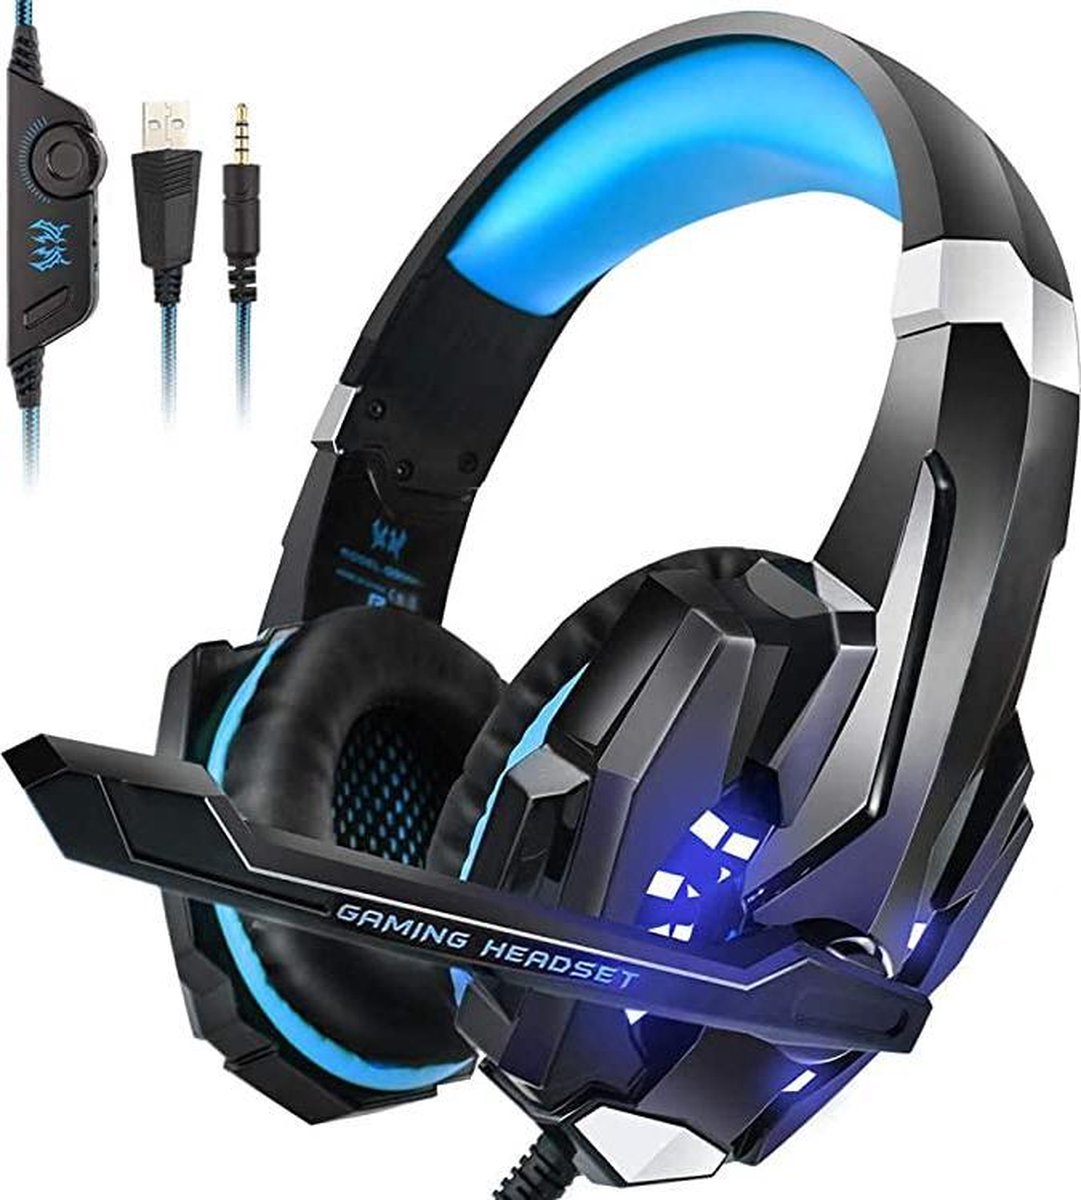 headset ontmoette microfoon for pc - hoofdtelefoon, PC gaming headset, Laptop, 3,5 mm ruisonderdrukkende gaming hoofdtelefoon ontmoette microfoon, surround sound systeem & extra 3,5 mm Y-jack adapter